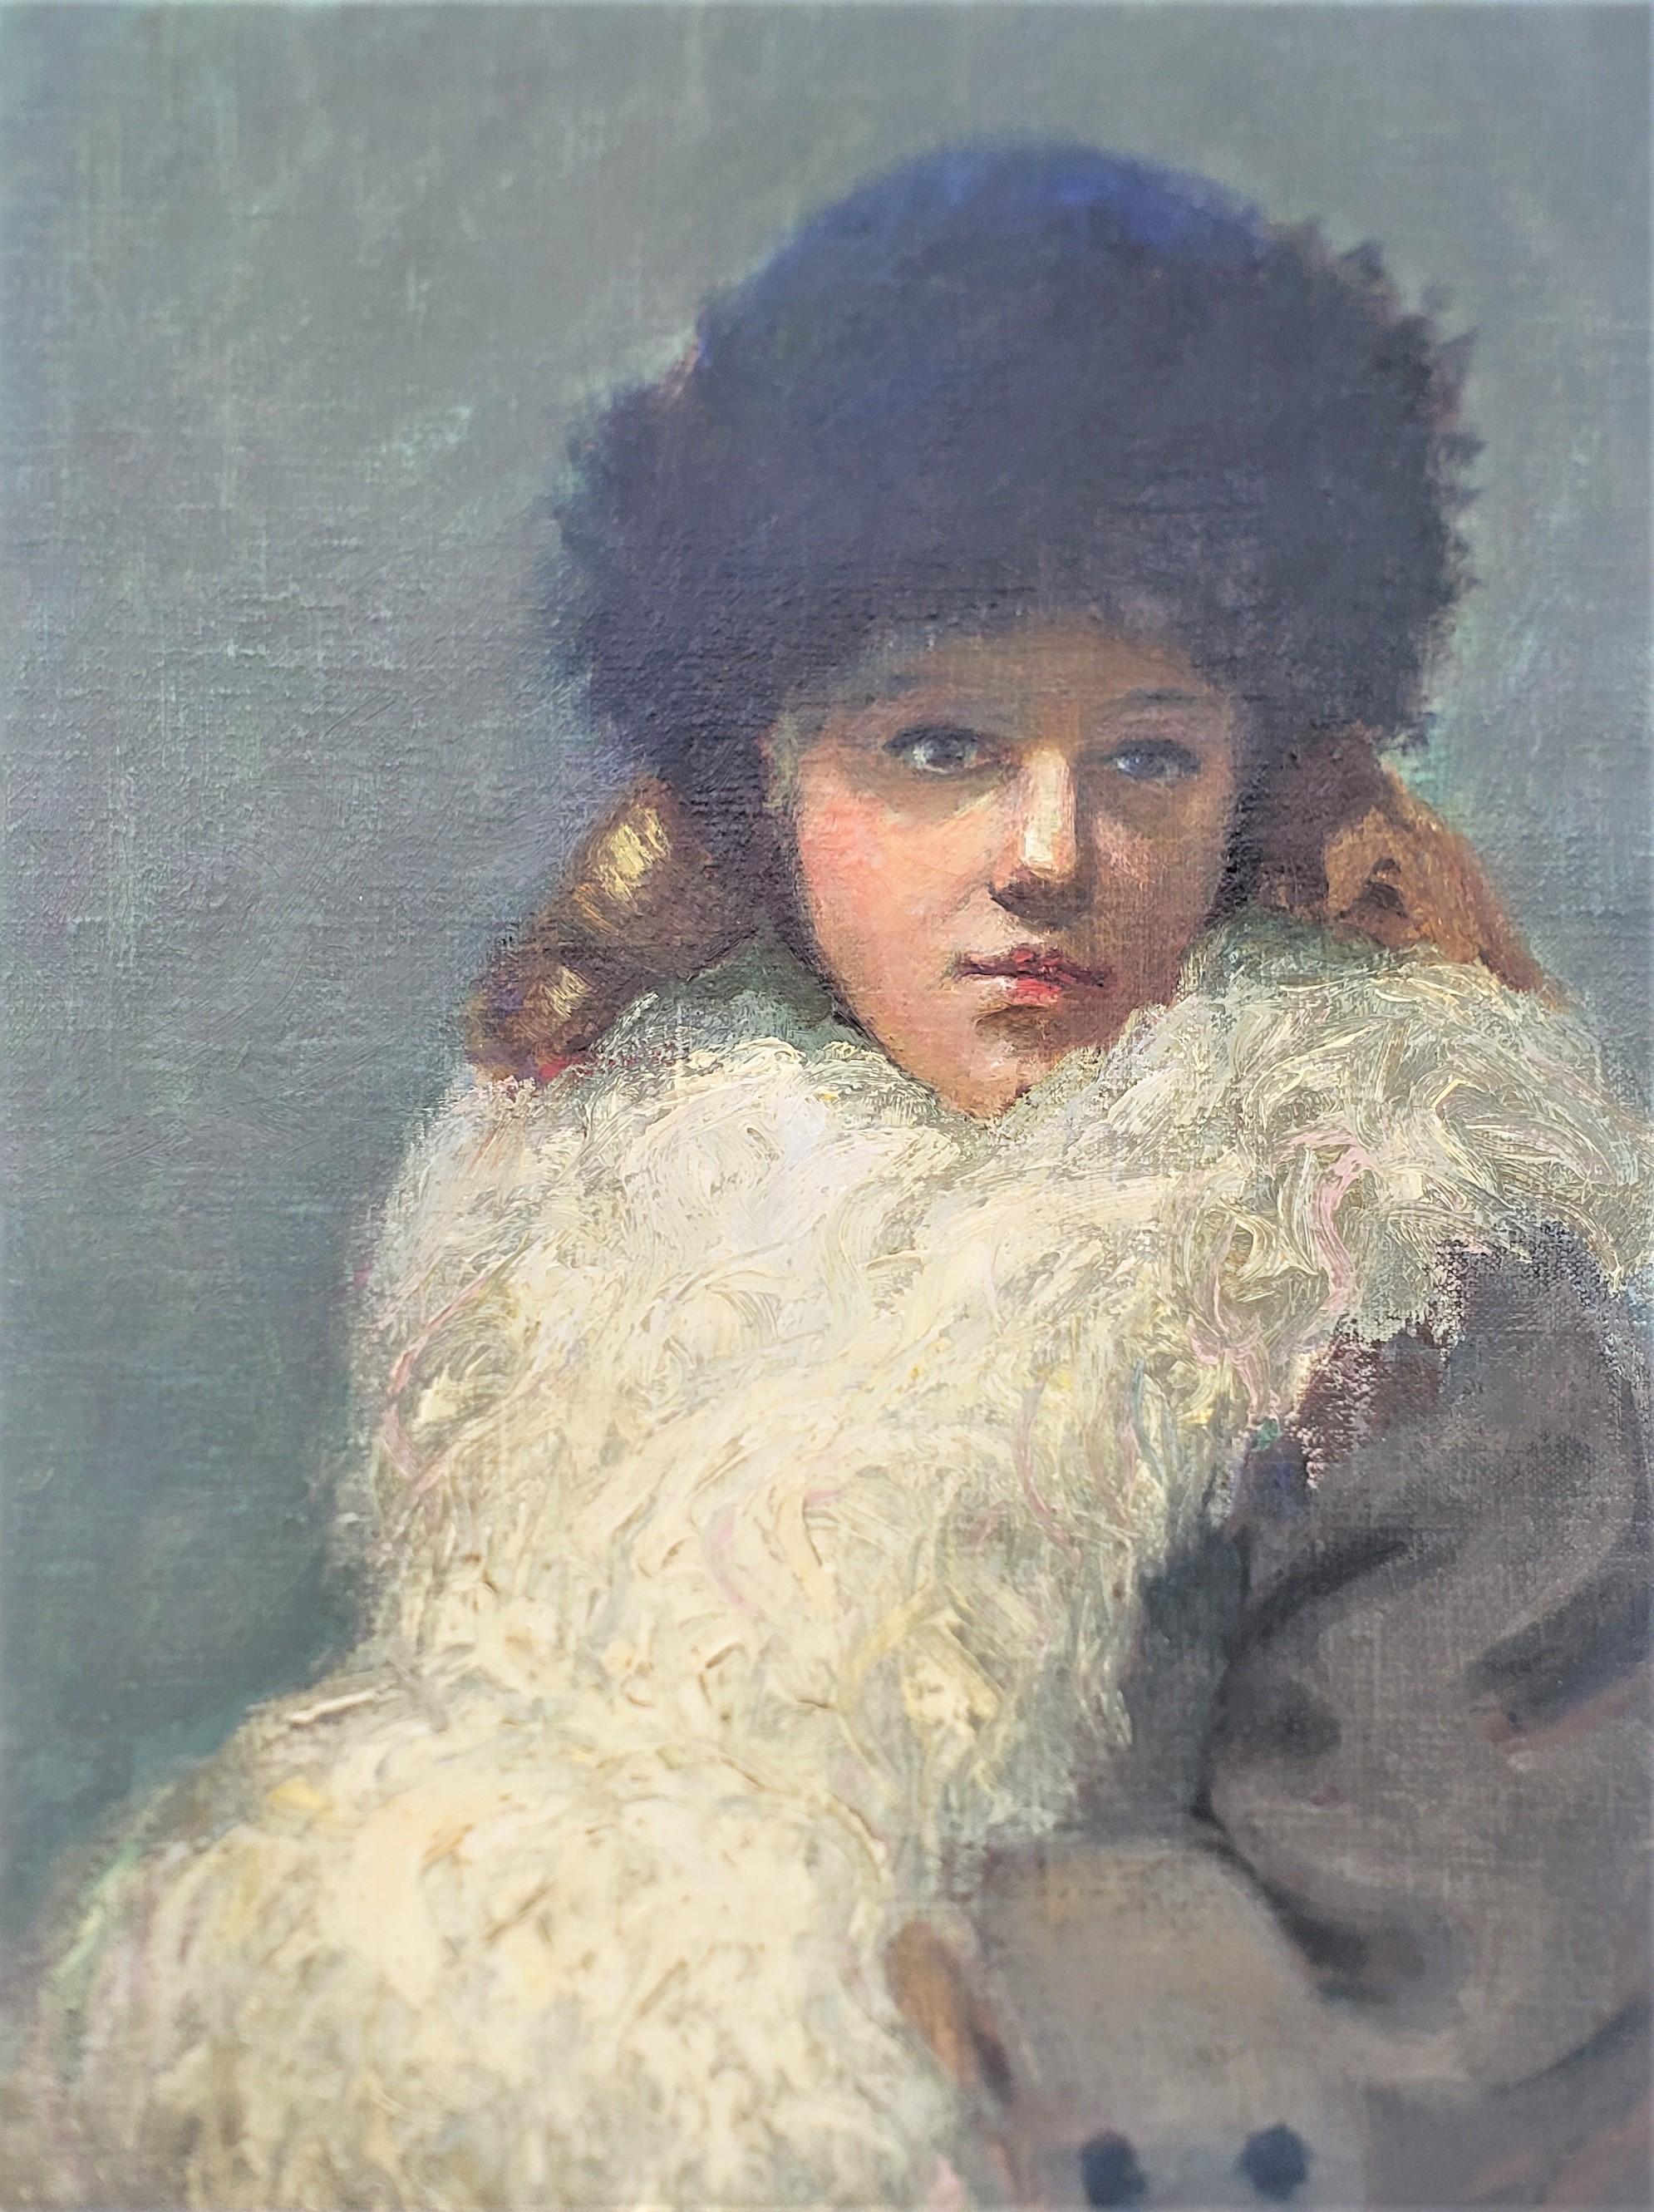 This very well executed antique oil painting is unsigned, with unknown origins, and is presumed to date to approximately 1920 and done in the period impressionistic style. The painting is done in oil on canvas and depicts a young woman in period